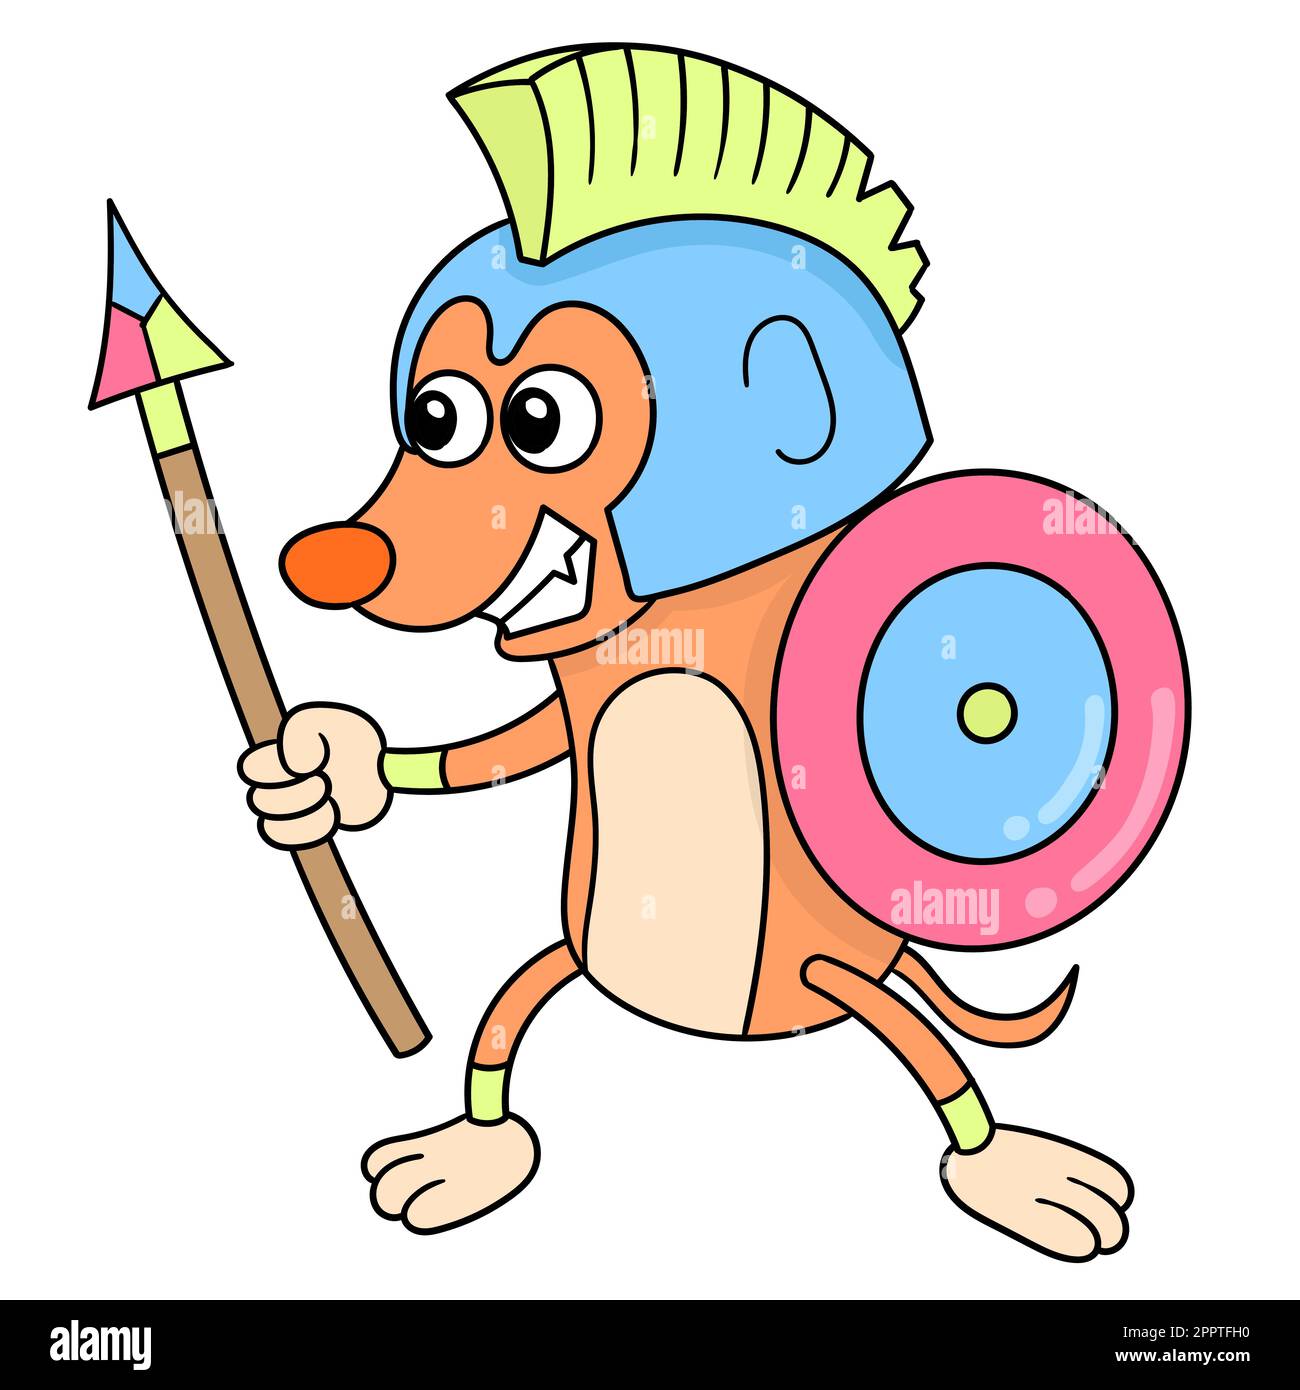 gladiator warriors carrying spears and shields, doodle icon image Stock Vector